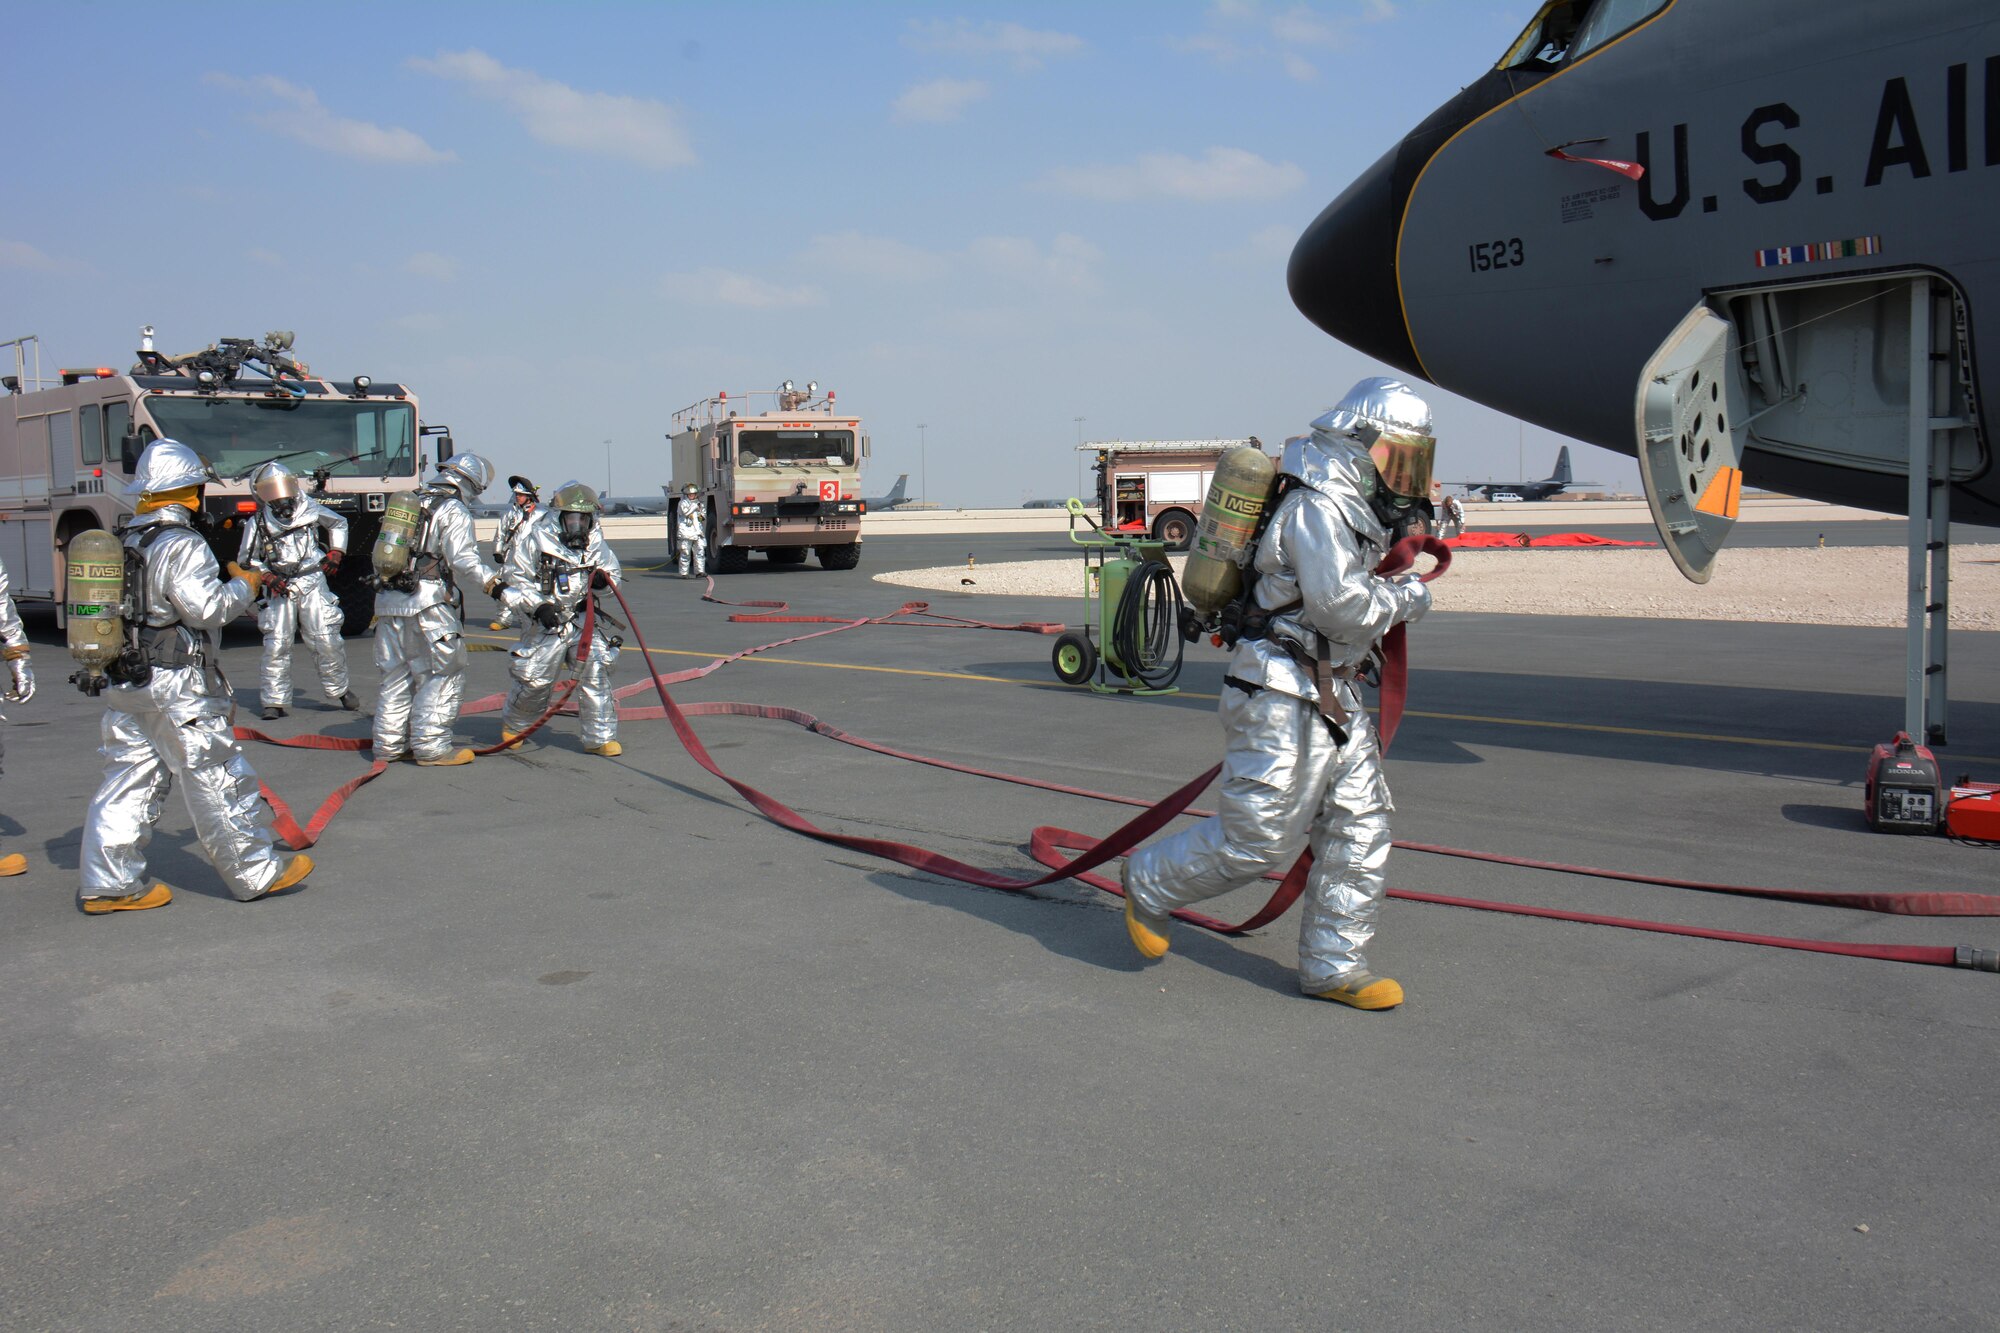 379th Civil Engineer Squadron firefighters work together to man several different fire hoses in an attempt to put out a simulated fire on a KC-135 Stratotanker and rescue an injured air crew member during a training exercise at Al Udeid Air Base, Qatar Nov. 20. Within minutes, several firefighters climbed on to the plane's left wing, entered the aircraft and pulled the injured air crew member to safety. Training exercises help first responders maintain their skillsets. (U.S. Air Force photo by Tech. Sgt. James Hodgman/Released)